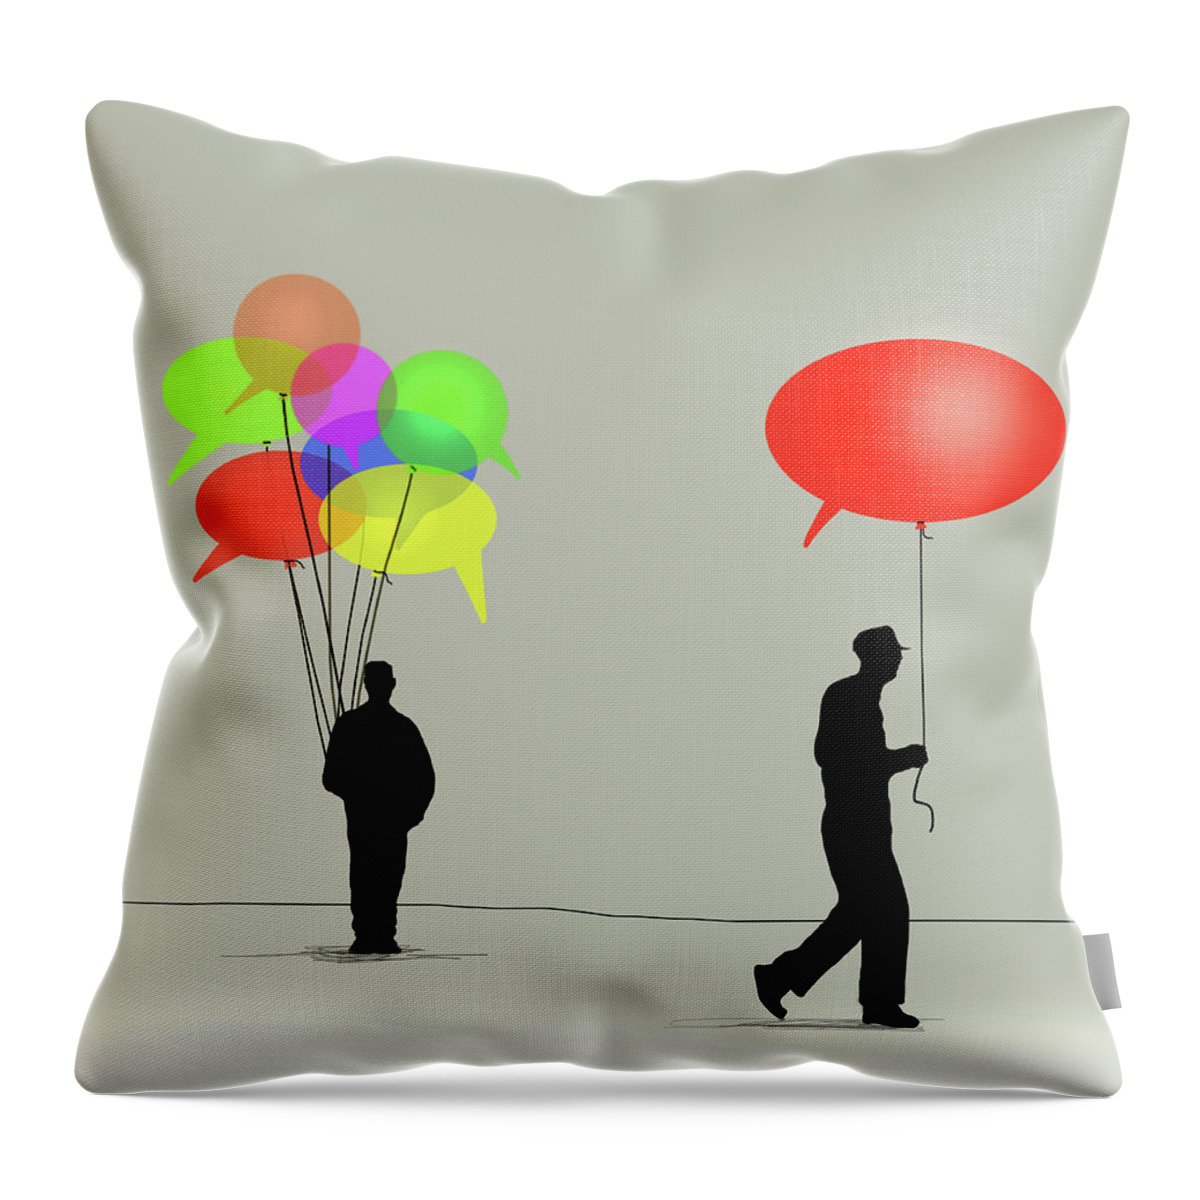 Adult Throw Pillow featuring the photograph Man Taking Speech Bubble Balloon by Ikon Ikon Images